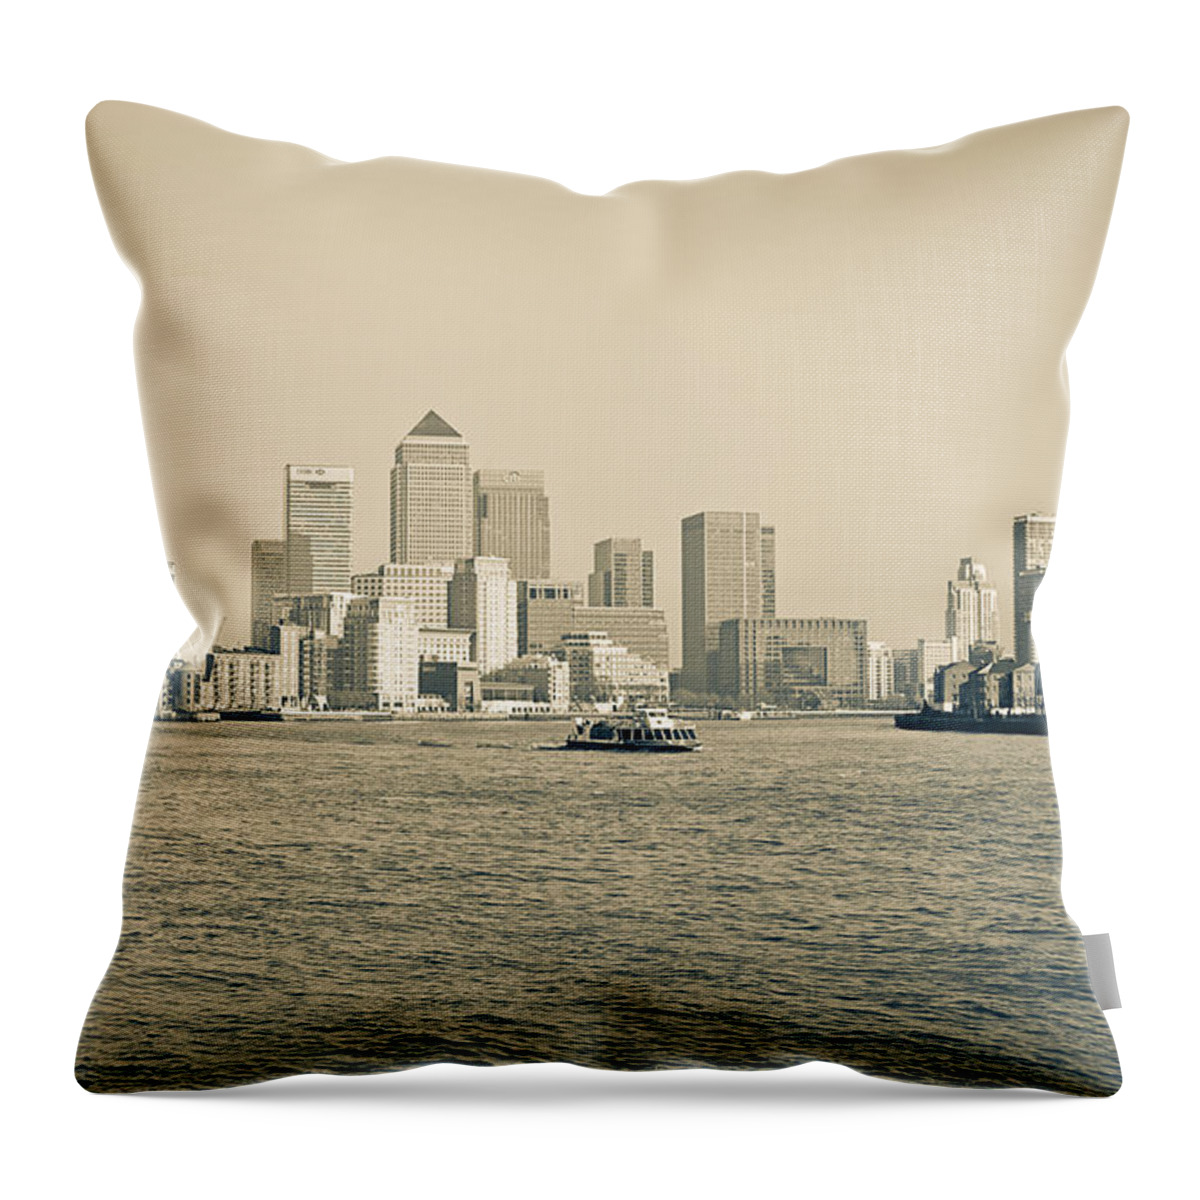 Lenny Carter Throw Pillow featuring the photograph Canary Wharf Cityscape by Lenny Carter